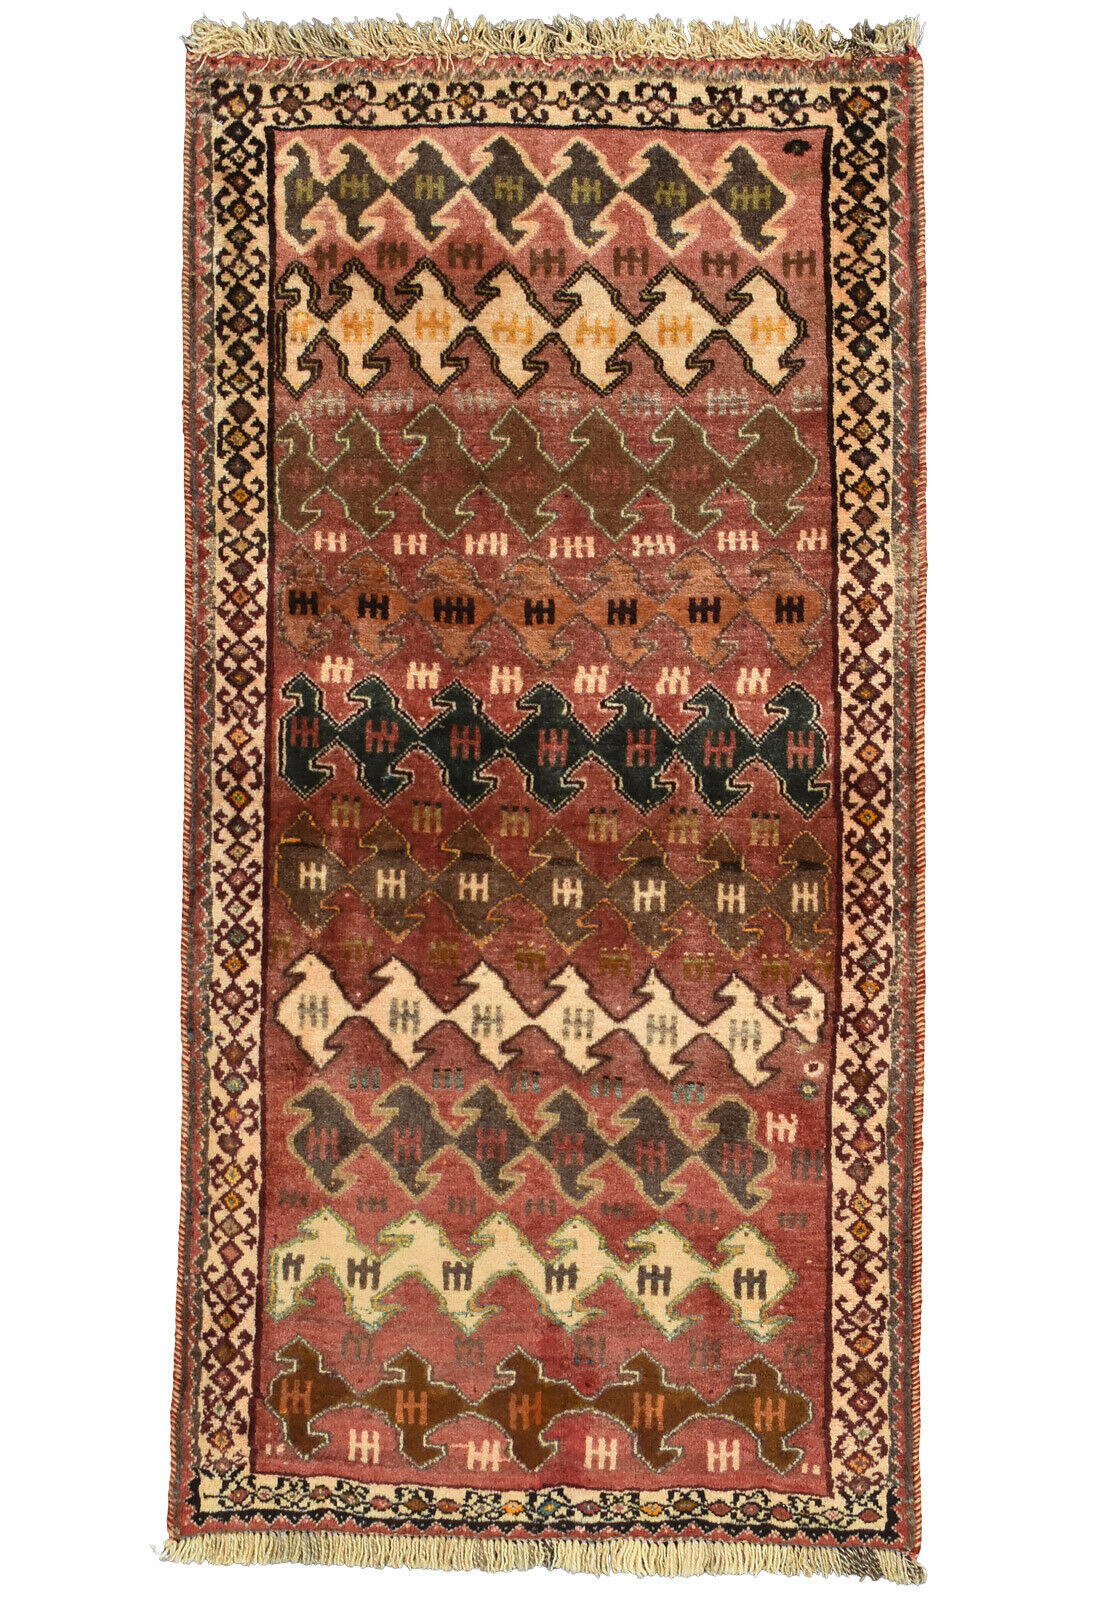 Vintage Tribal Qashqai Rug, 3'x5', Red, Hand-Knotted Wool Pile